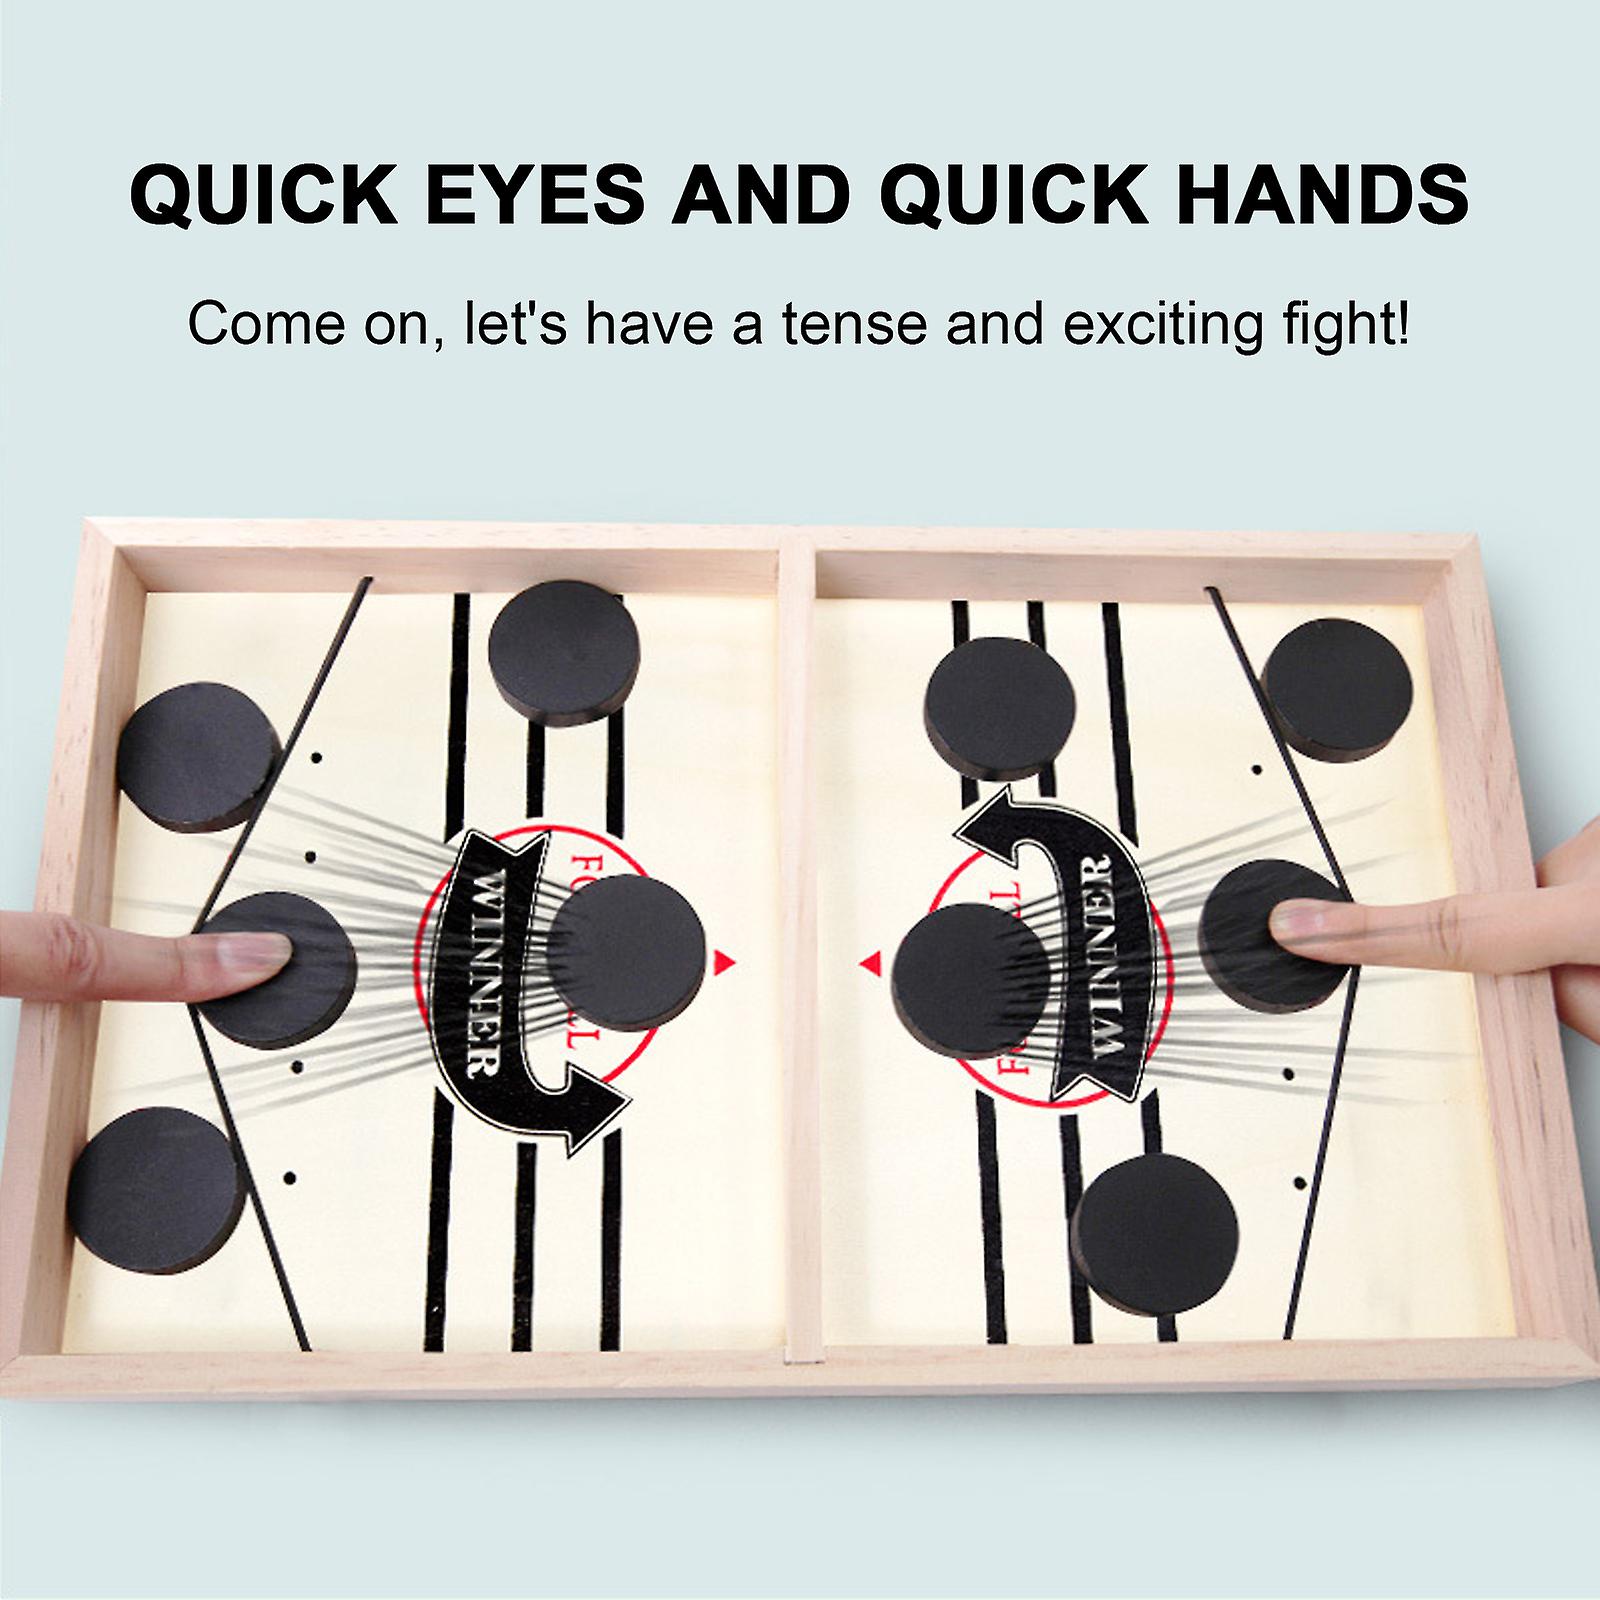 Sling Puck Foosball Winner Wooden Board Game with Fast Paced